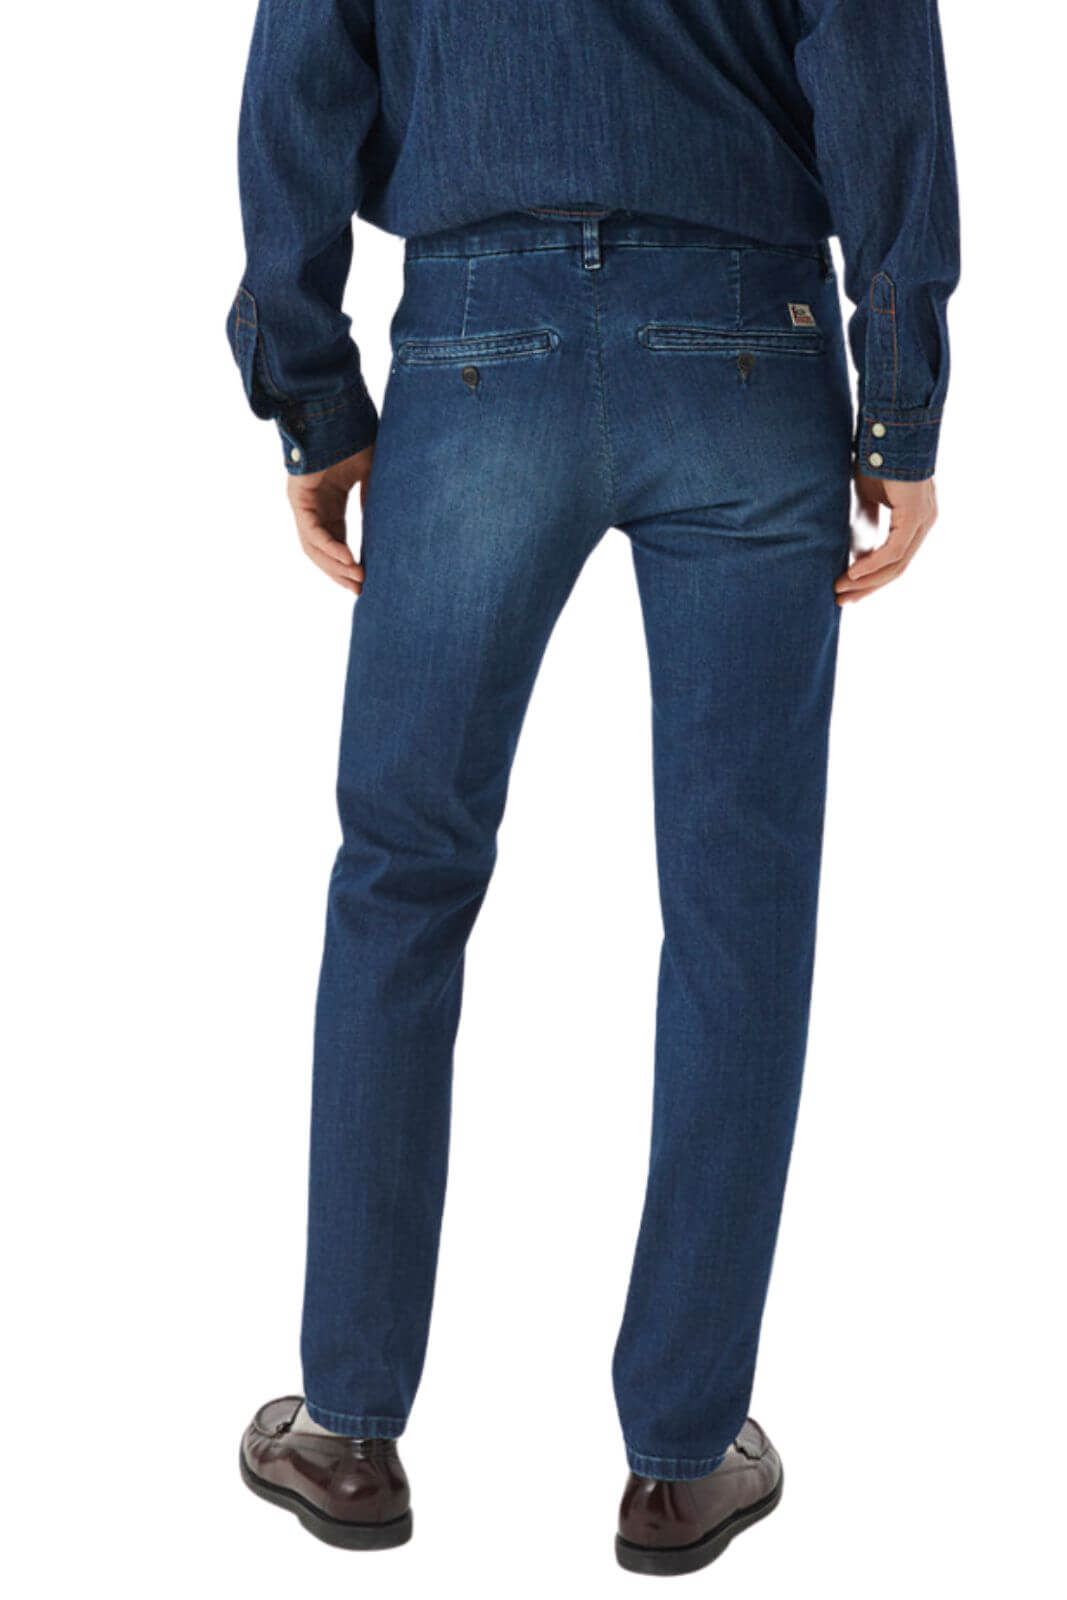 Roy Roger’s jeans uomo New Rolf Mid Wash